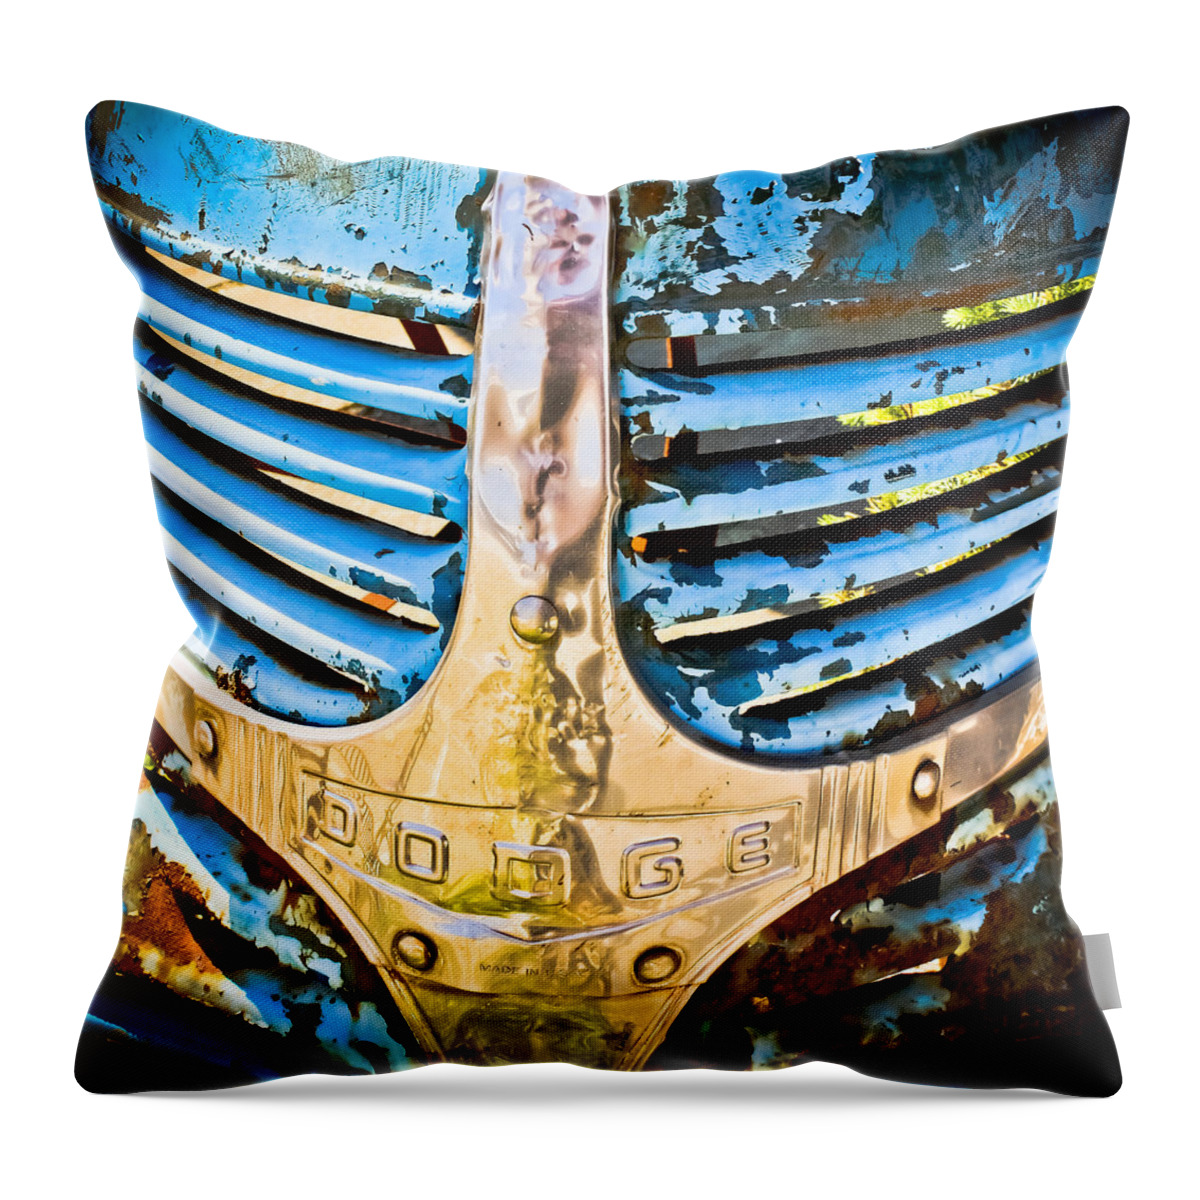 Dodge Throw Pillow featuring the photograph Blue Dodge - Grab Life by Colleen Kammerer